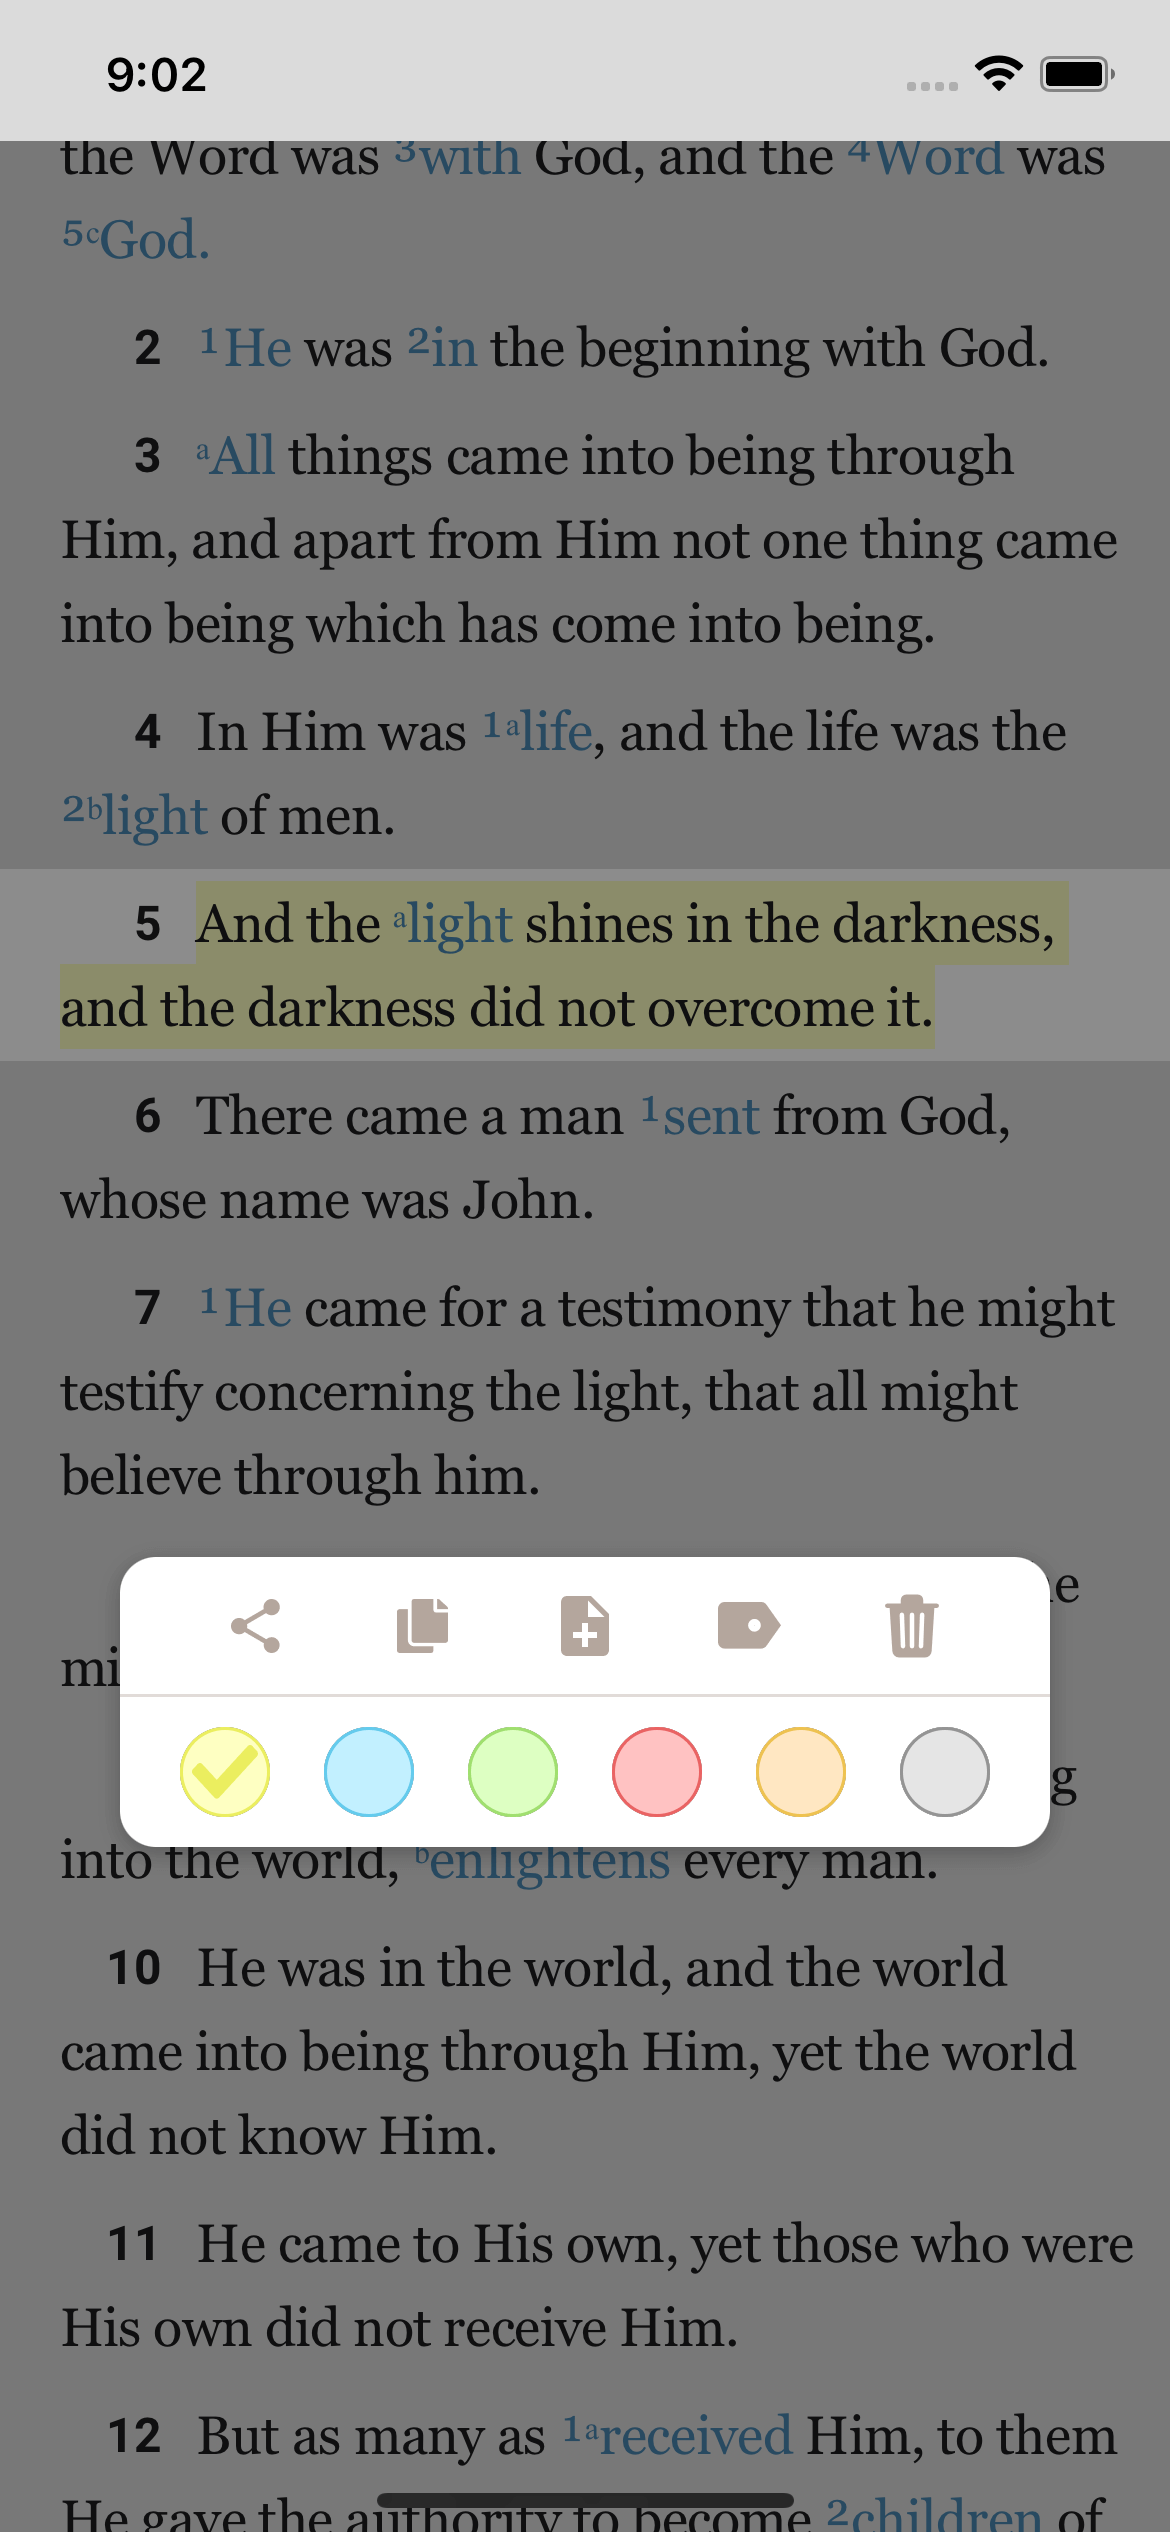 Change a highlight color